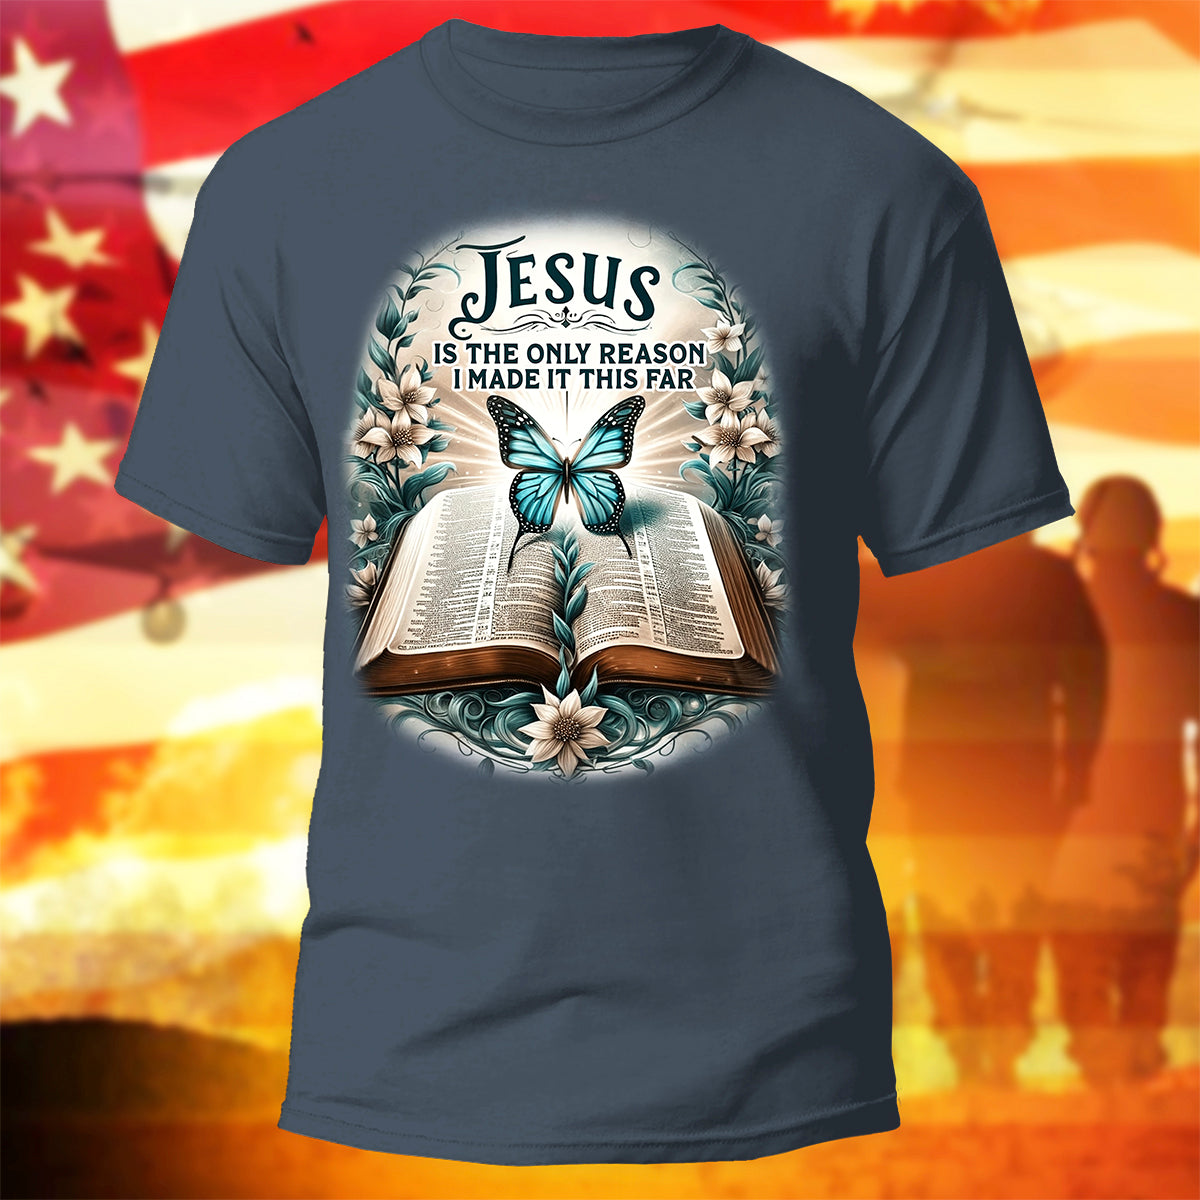 Jesus Butterfly T-Shirt Jesus Is The Only Reason I Made It This Far Shirt Christian Gift